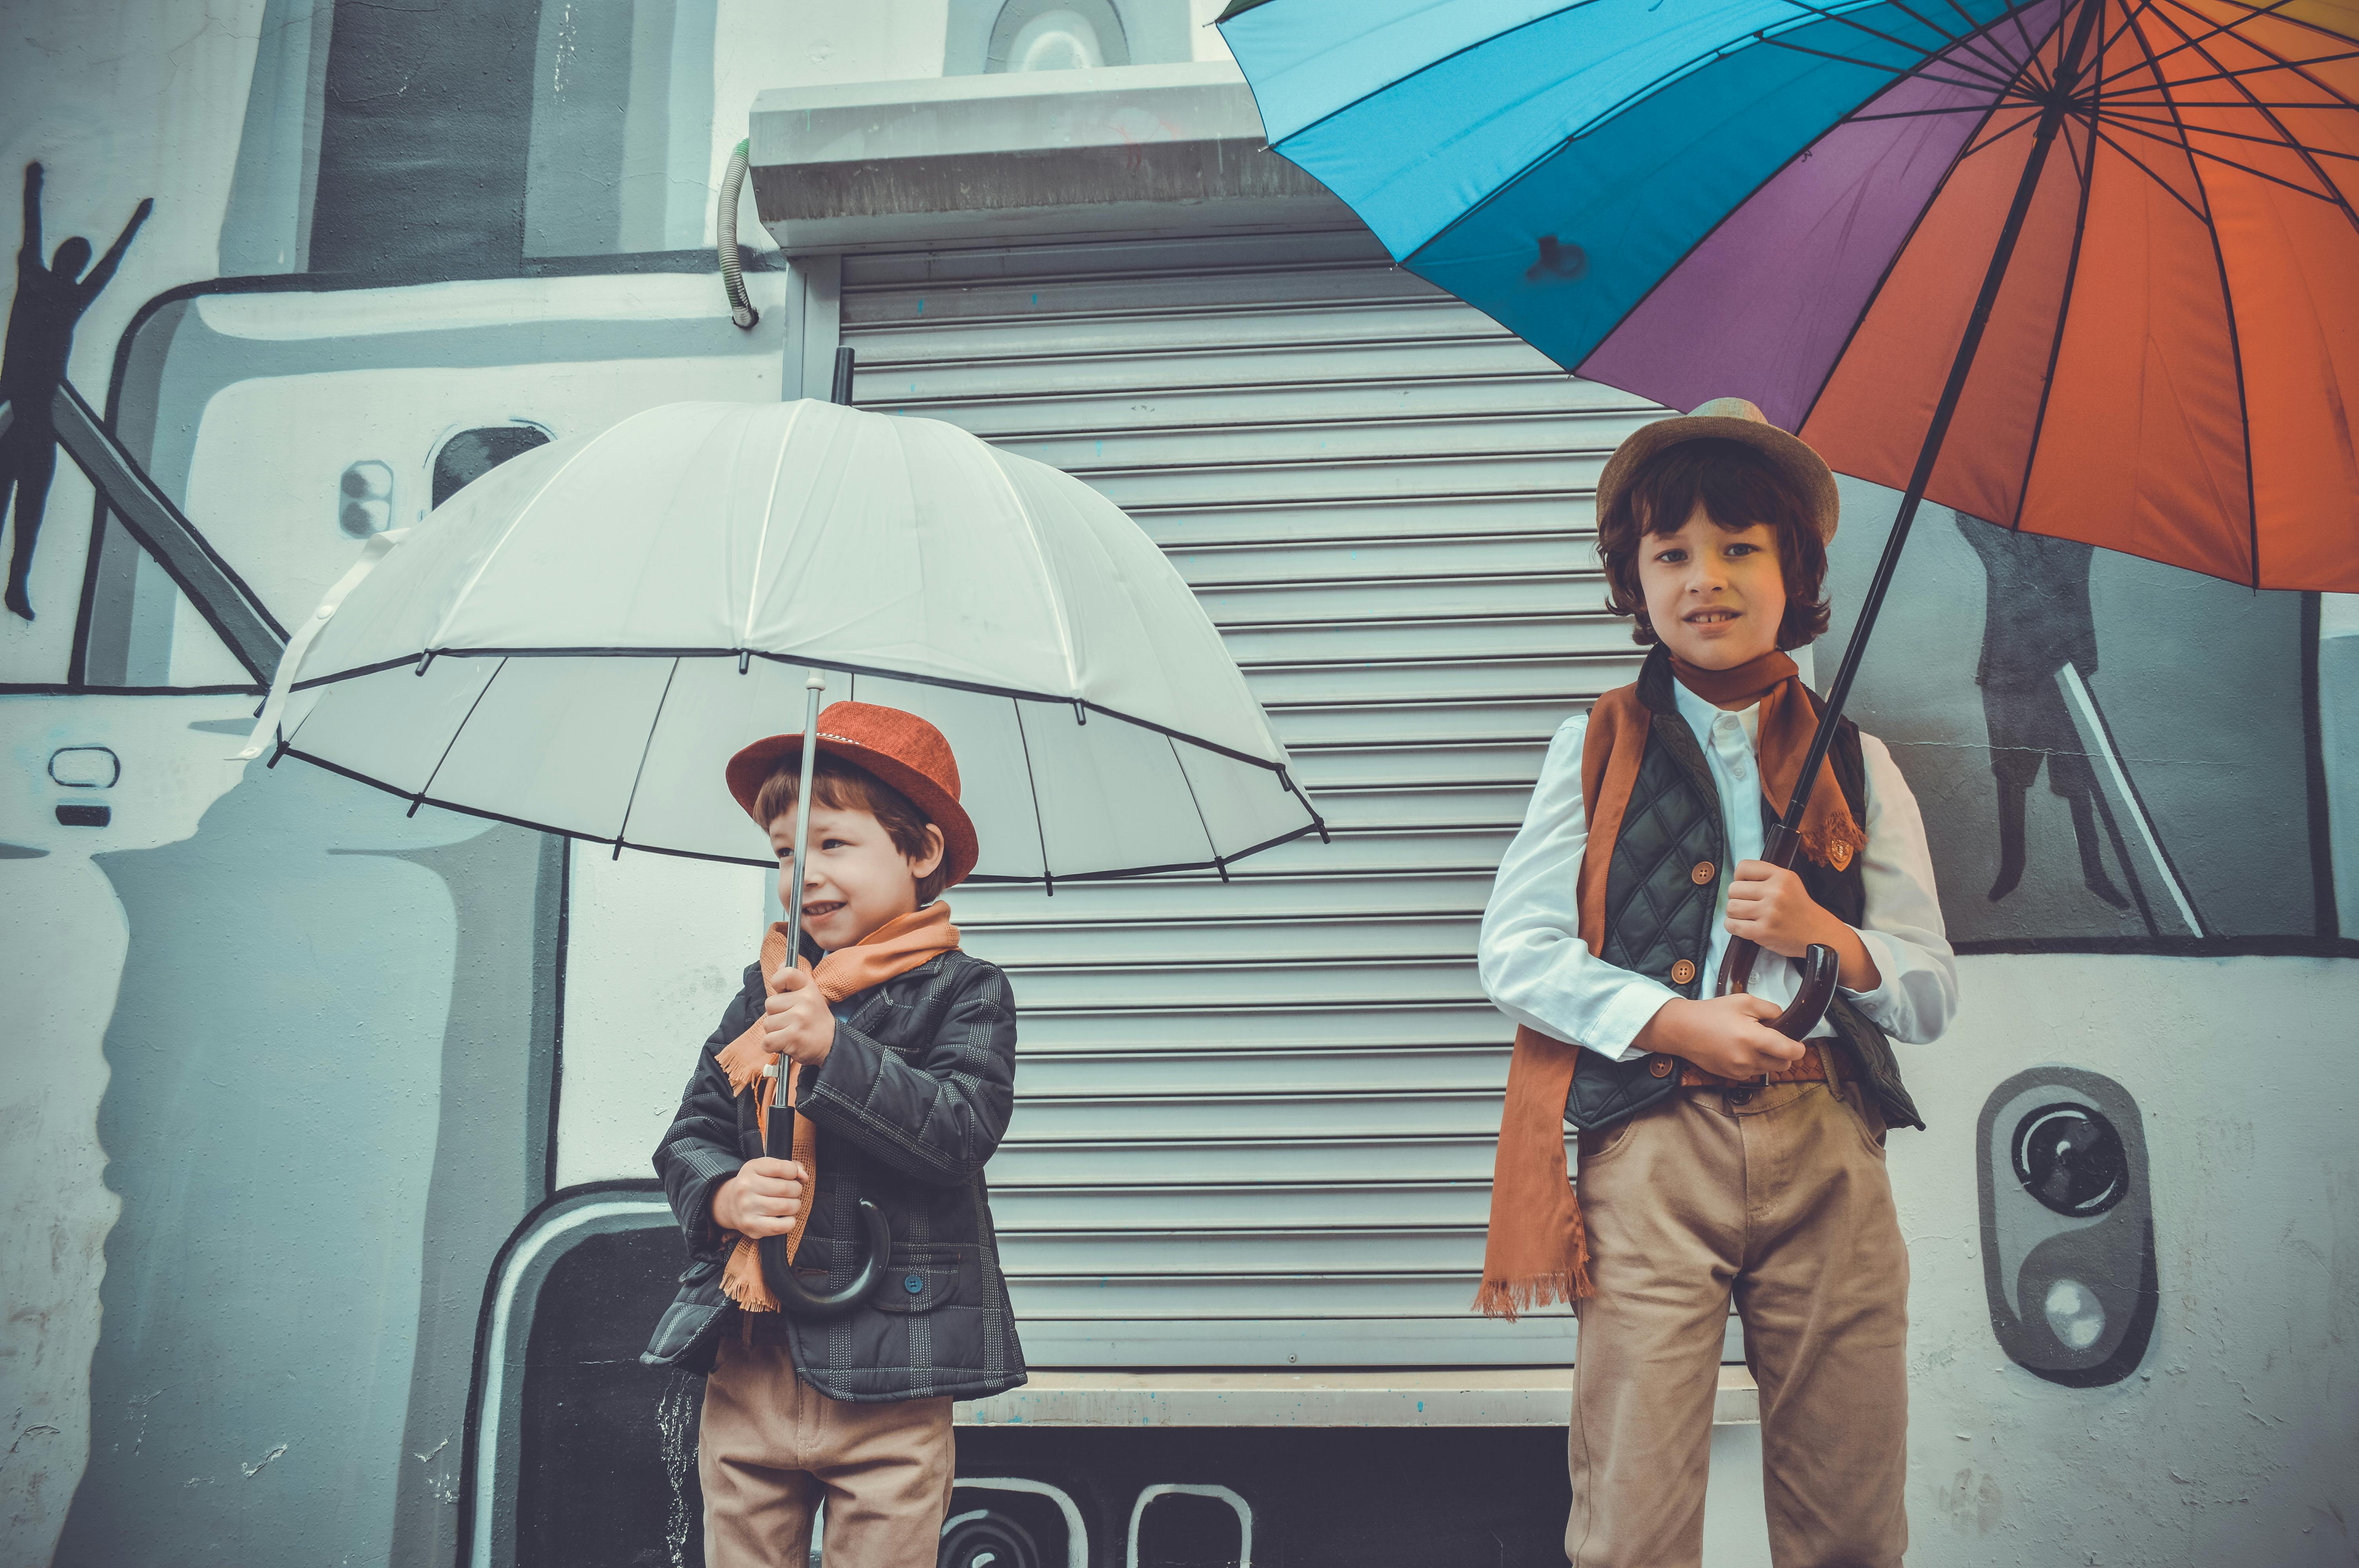 two children holding umbrellas while smiling